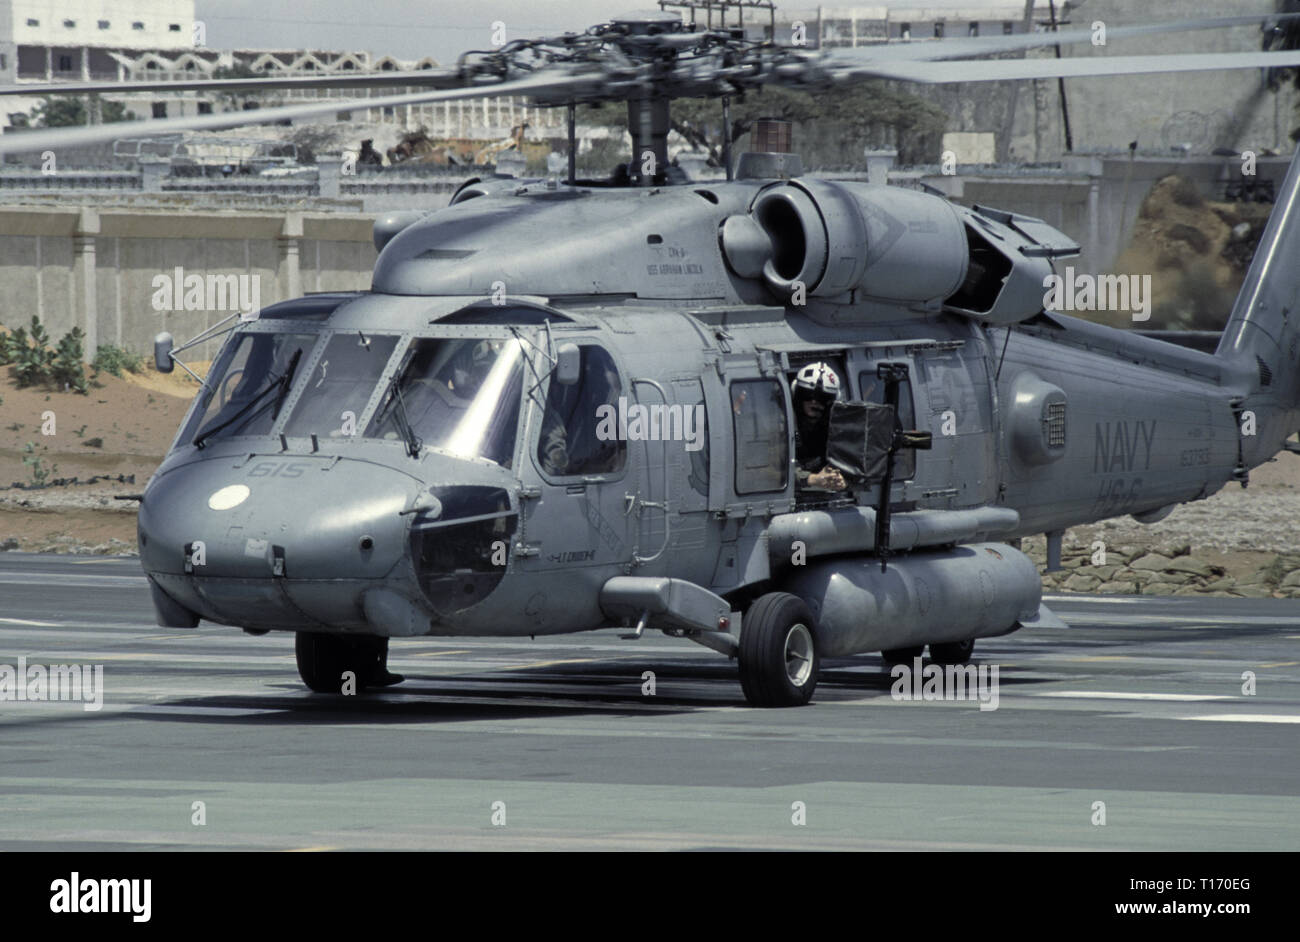 29th October 1993 A U.S. Navy Sikorsky SH-60 Seahawk helicopter from the USS Abraham Lincoln, ready for take-off from UNOSOM HQ in Mogadishu, Somalia. Stock Photo